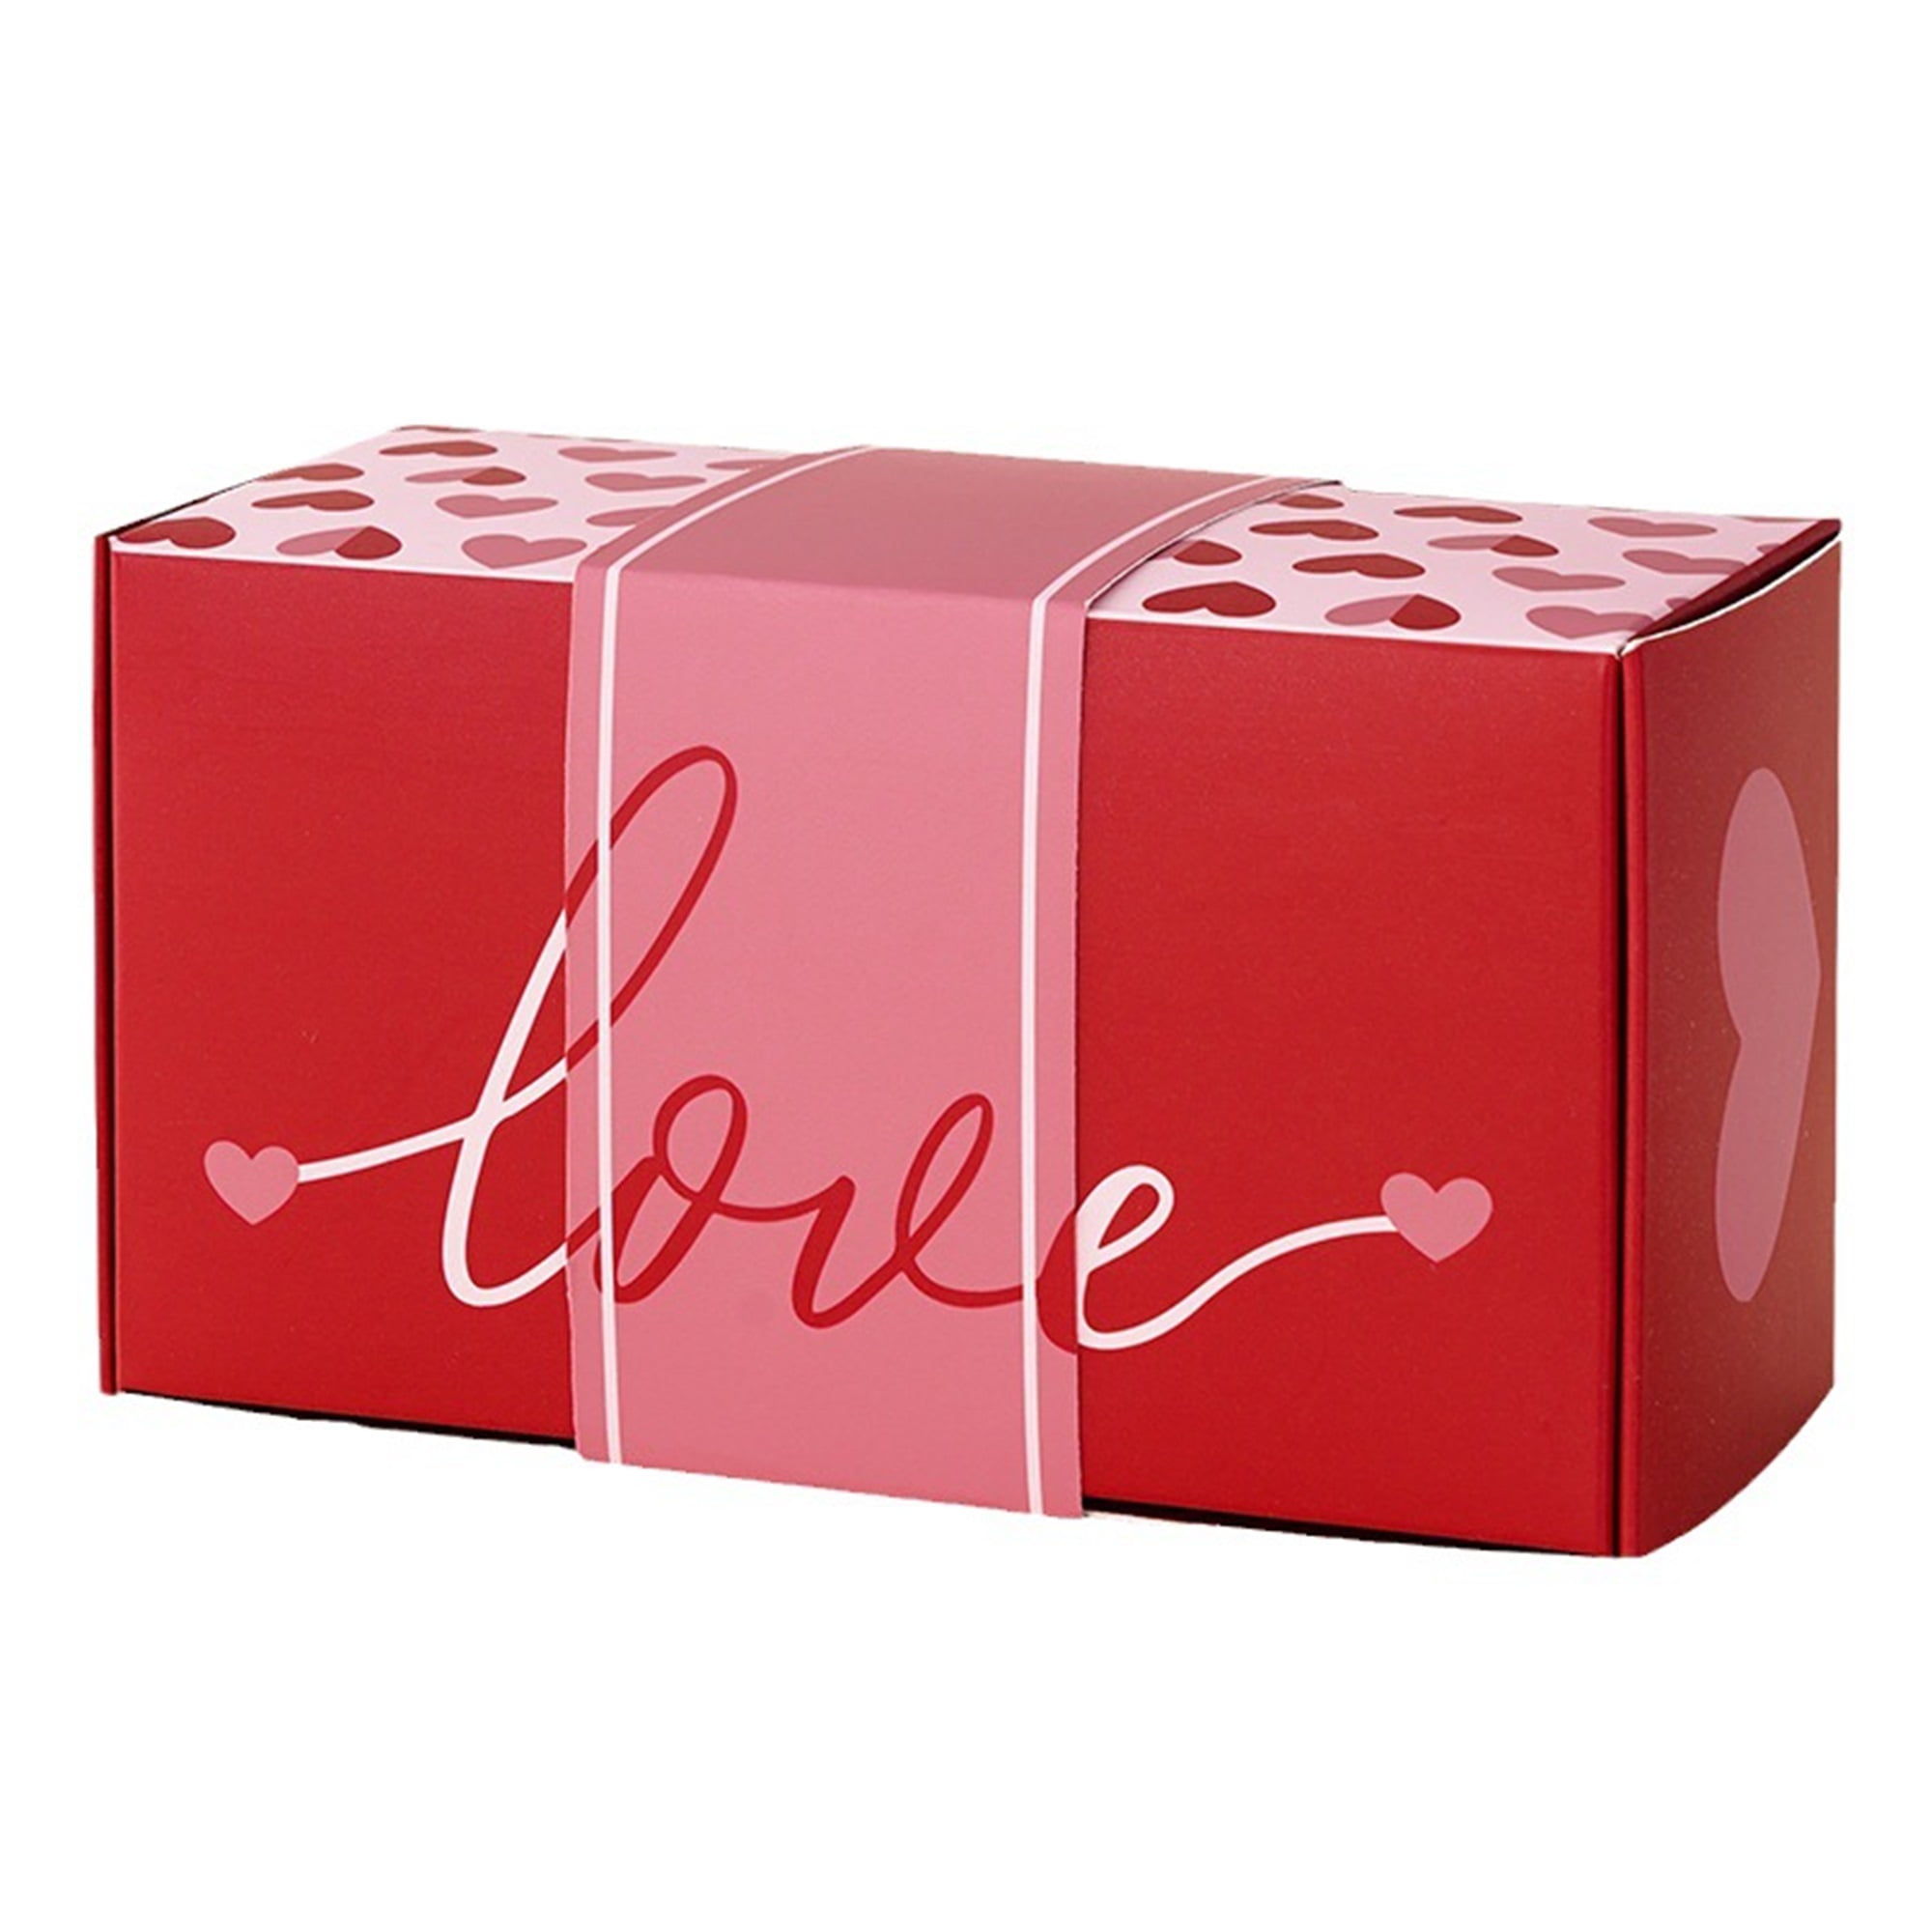 Cajas De Regalo Sorpresa, Small Gift Boxes Creating The Most Surprising  Gift, Surprise Box For Birthday Anniversary Valentine Day Gifts And  Christmas